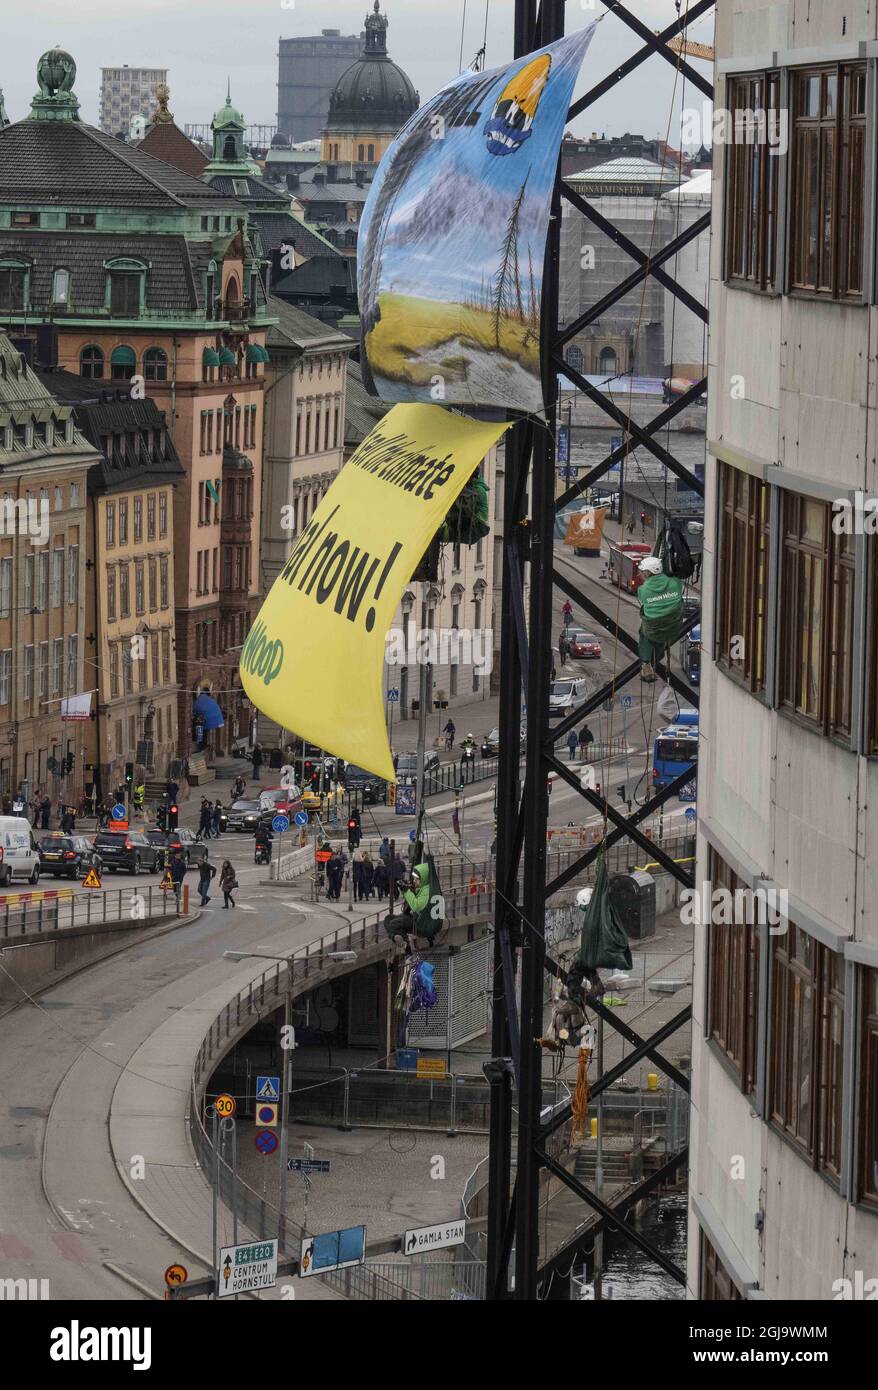 STOCKHOLM 2016-04-27 German activist are seen protesting against the Swedish company VattenfallÃ‚Â´s coal mines in Germany in Stockholm, Sweden, April 27, 2016. Foto Leif Blom / TT-Bild code 50080 pollution, environment, protest, demonstration, protesters,industry,politics, economy,  Stock Photo